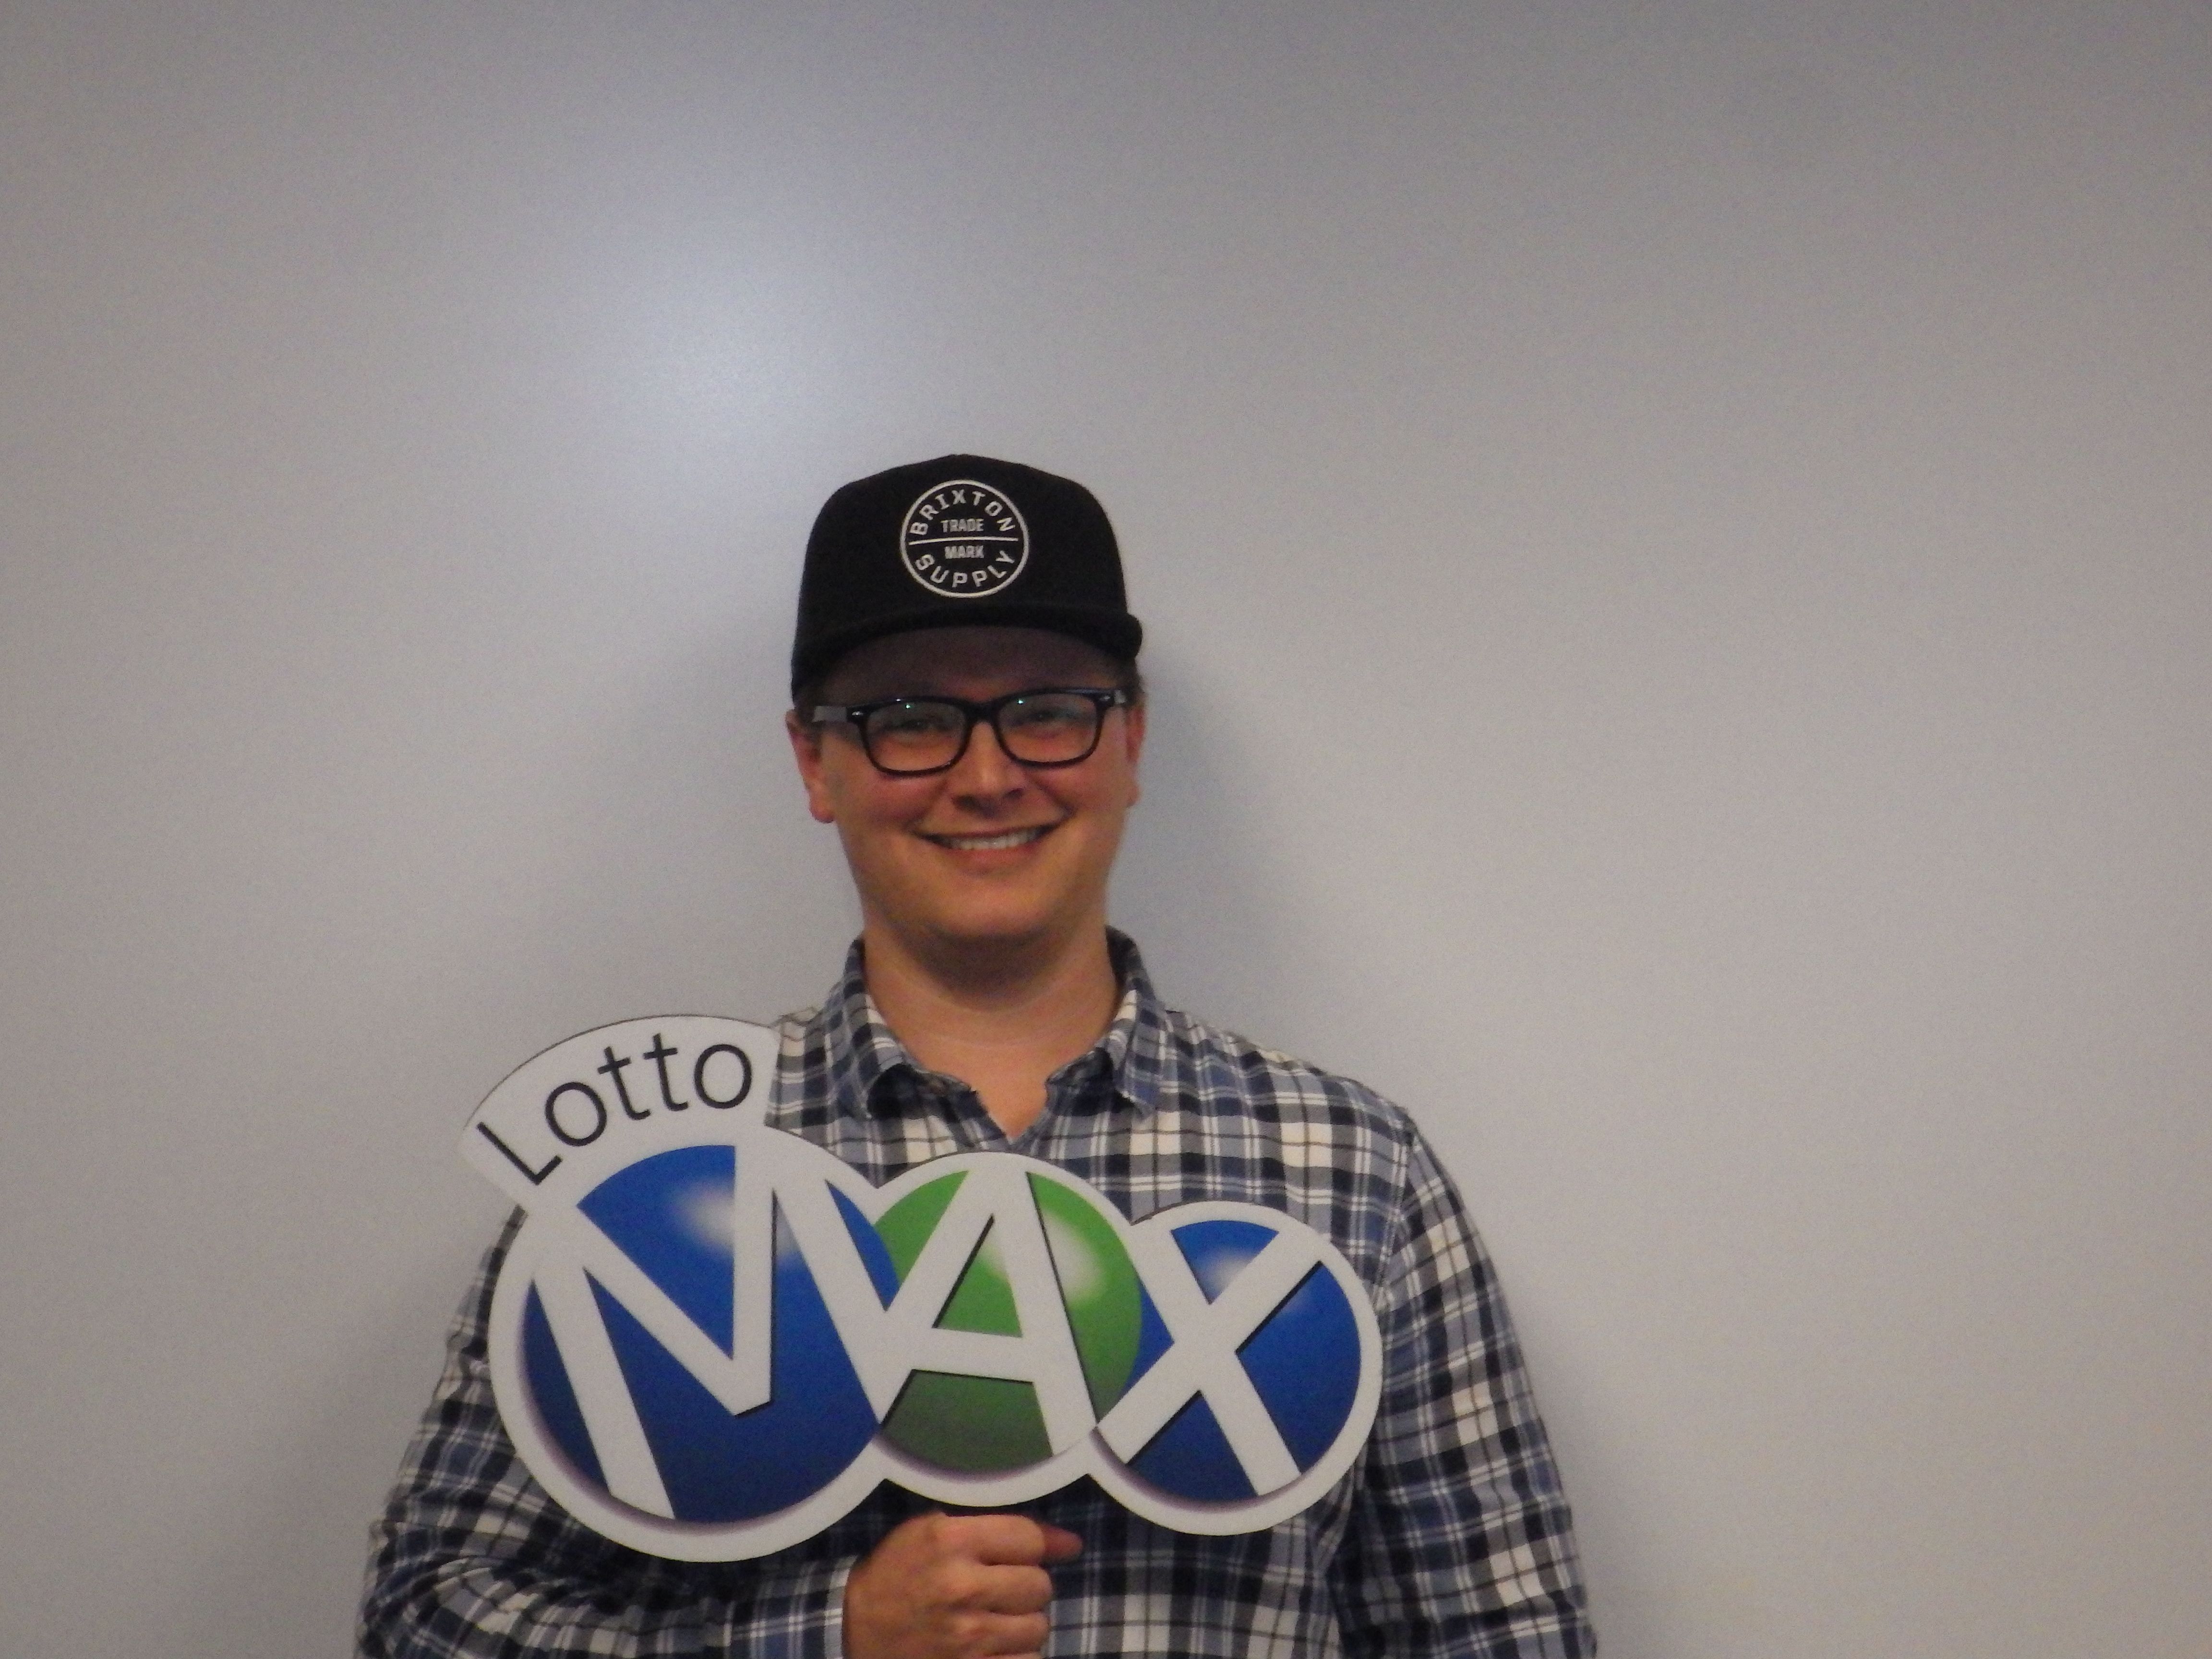 lotto max aug 16 2019 winning numbers